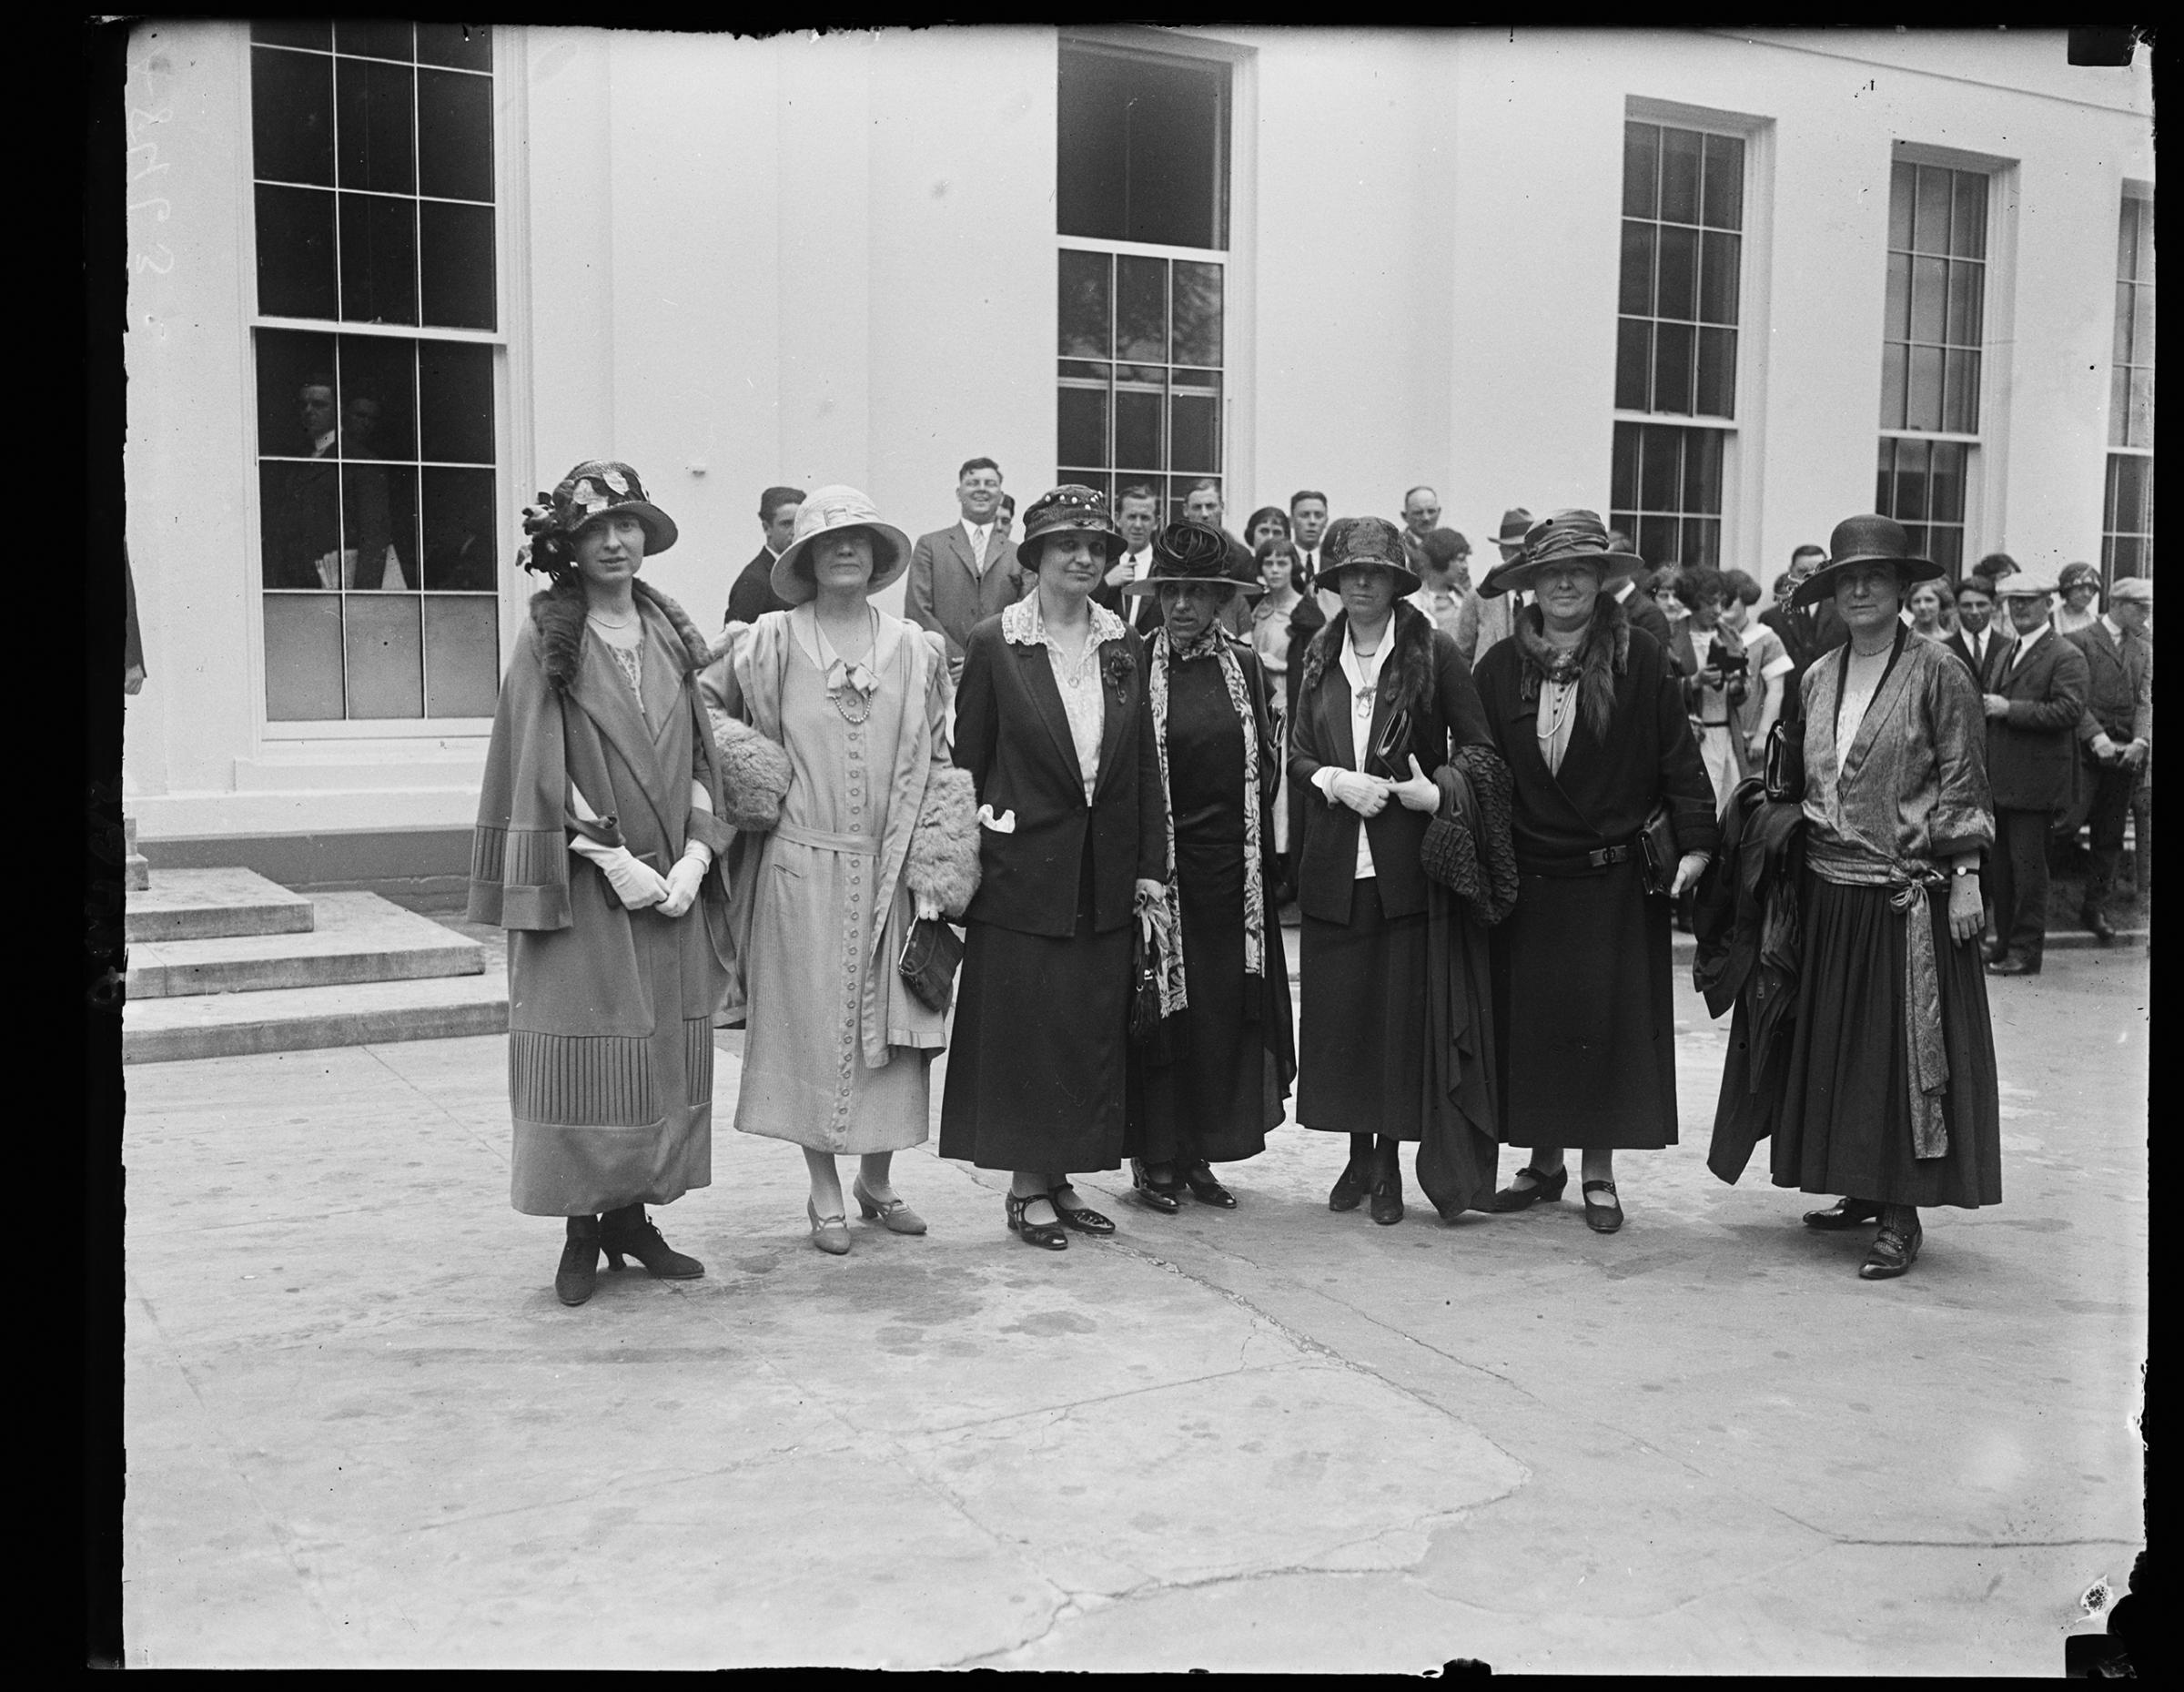 1924Prominent Republican women call on Pres. to discuss the part of women will play in the coming election. Lft to rt.: Miss Lucille Atcherson, State Dept., Mrs. B.P. Bruggmann, US Compensation Comm., Miss Mabel W. Willebrandt, Asst. Atty. Gen.; Mrs. Mary Anderson, Chmn., Woman's Bur., Labor Dept.; Miss Anne Webster, Chmn. Nat'l League of Women Voters; Miss Julia Lathrop, 1st Vice-Chmn., Nat'l League Women Voters; Miss Grace Abbott, Head Children's Bur., Labor Dept. [White House, Washington, D.C.]